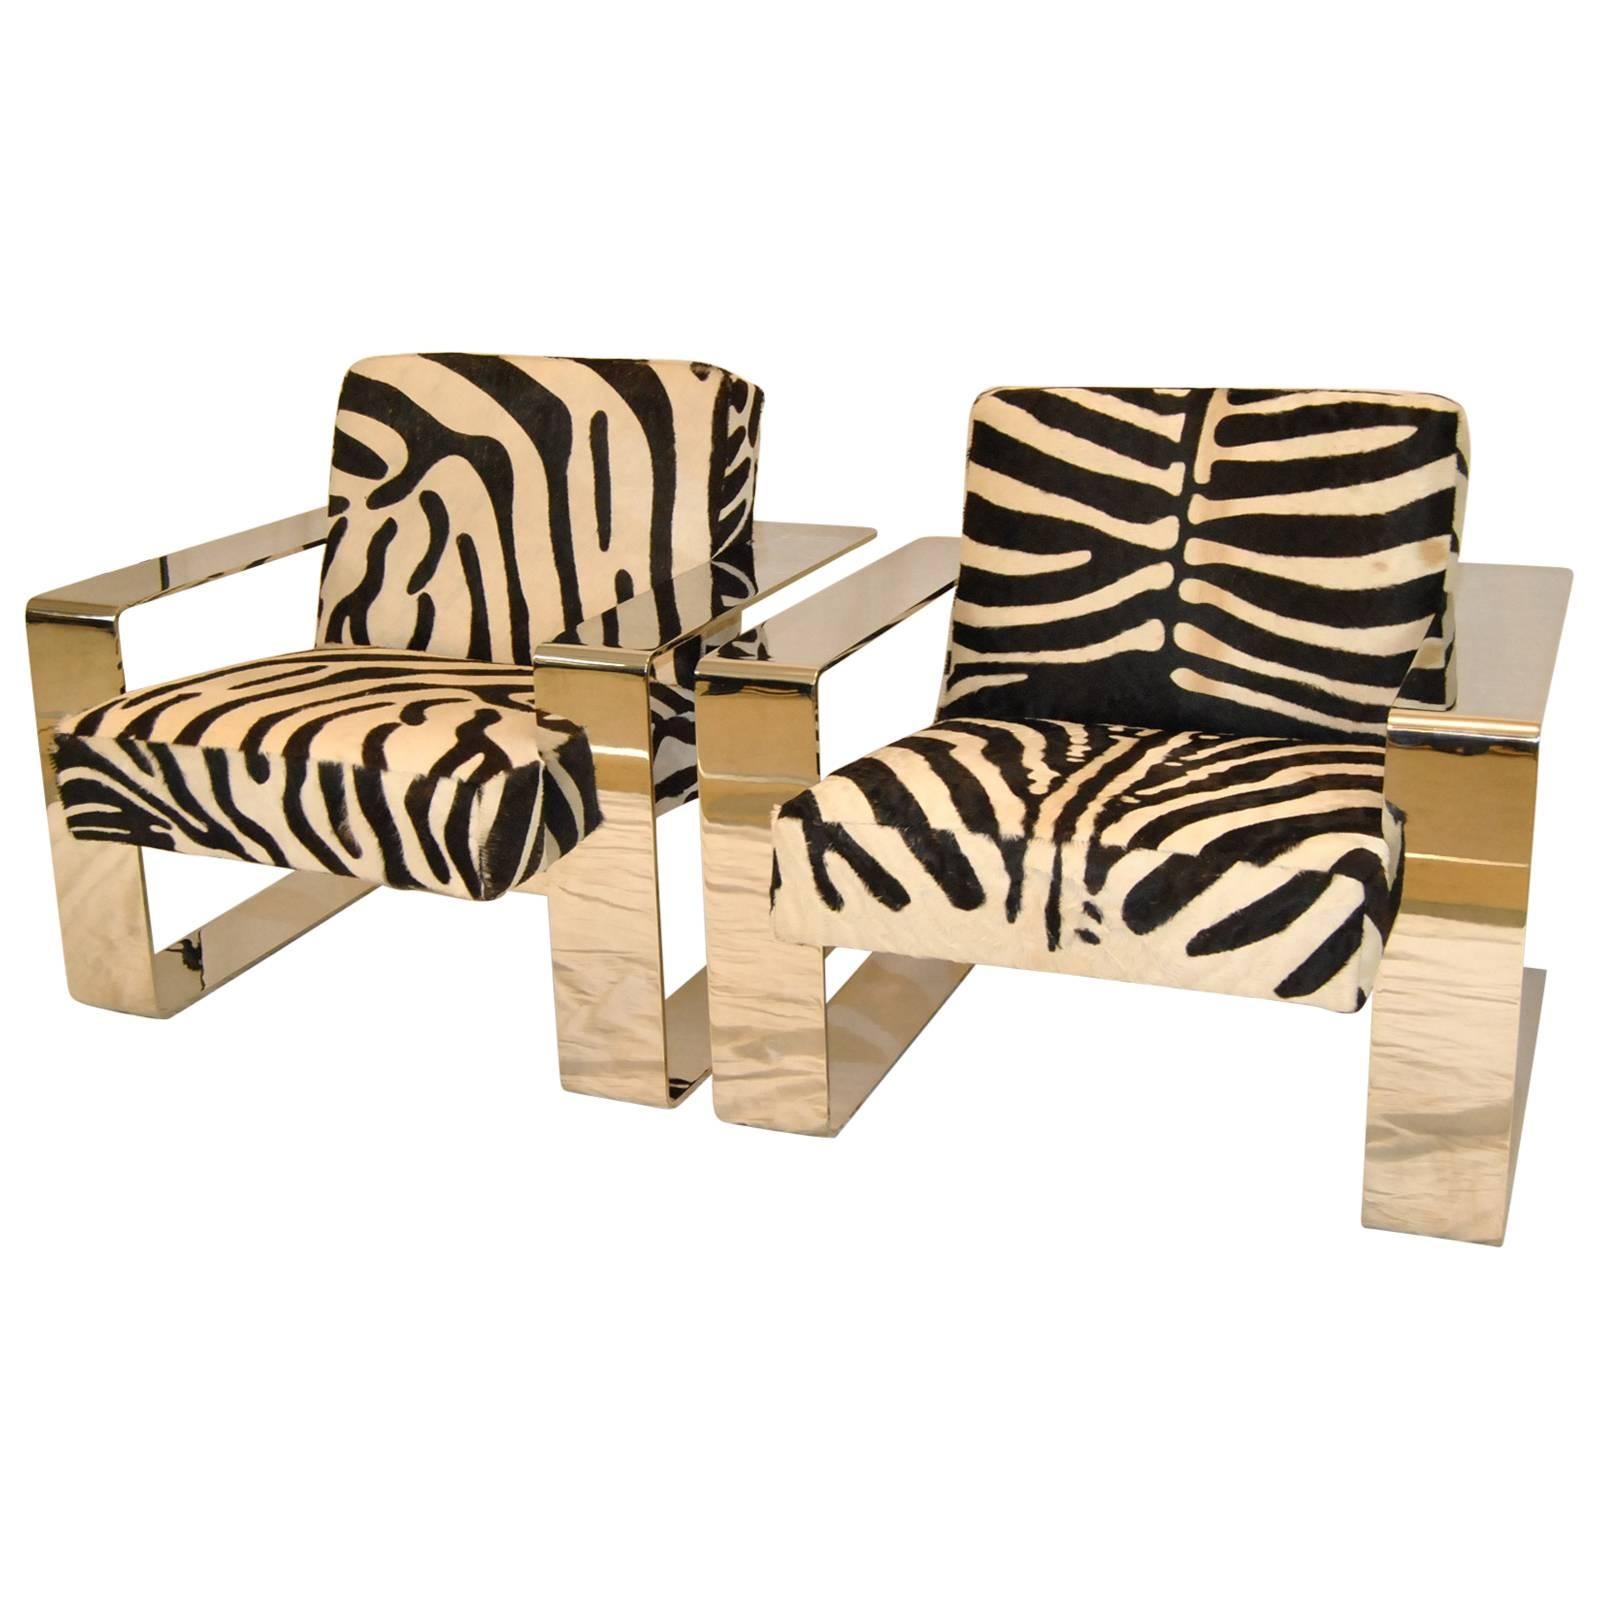 Pair of Connor Chairs with Chrome Frame and Zebra Print Cowhide Upholstery